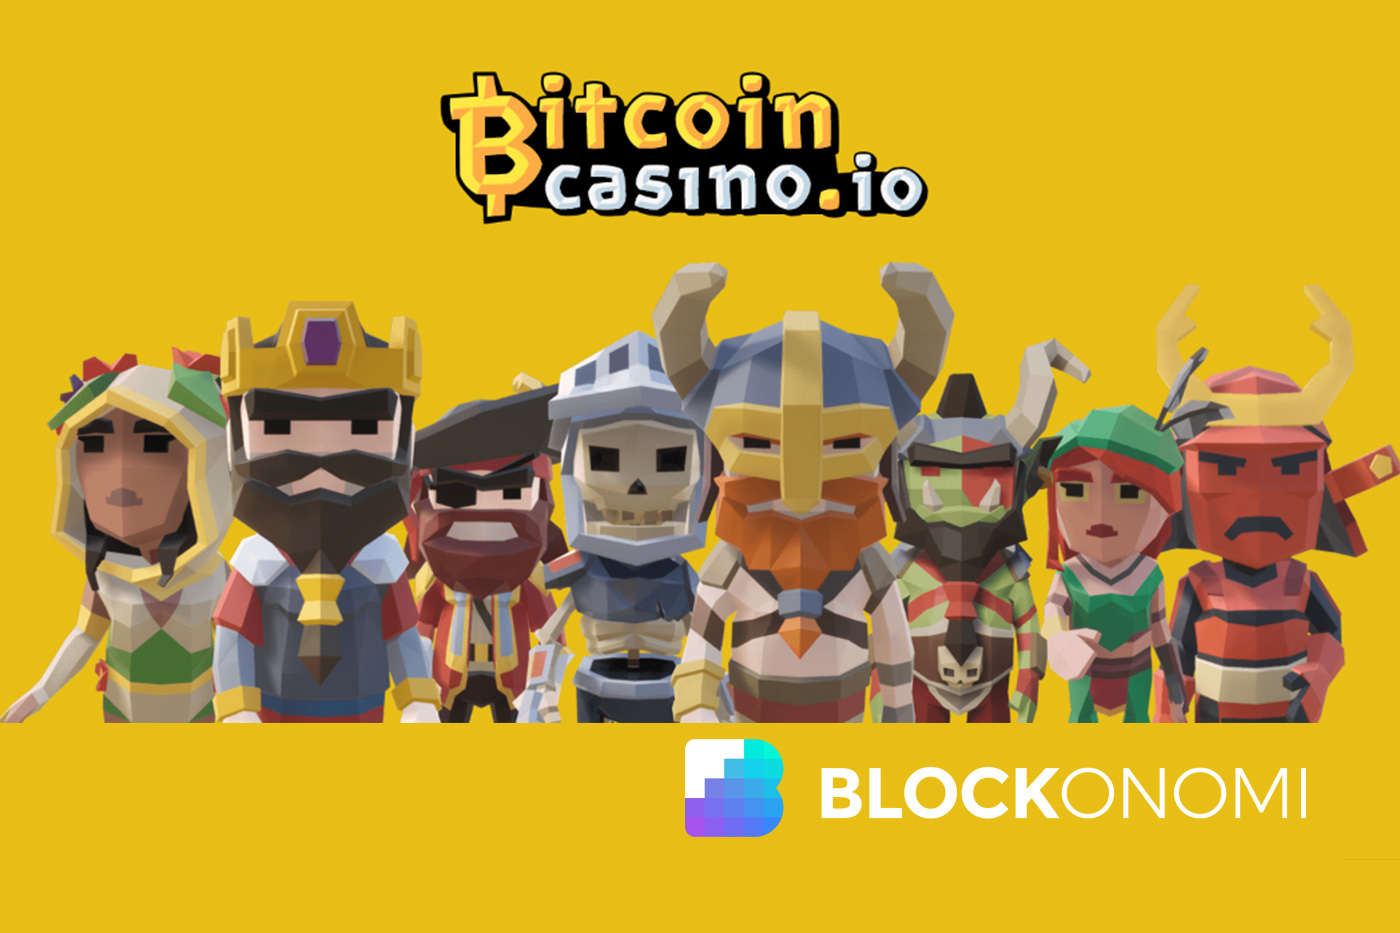 List of crypto games